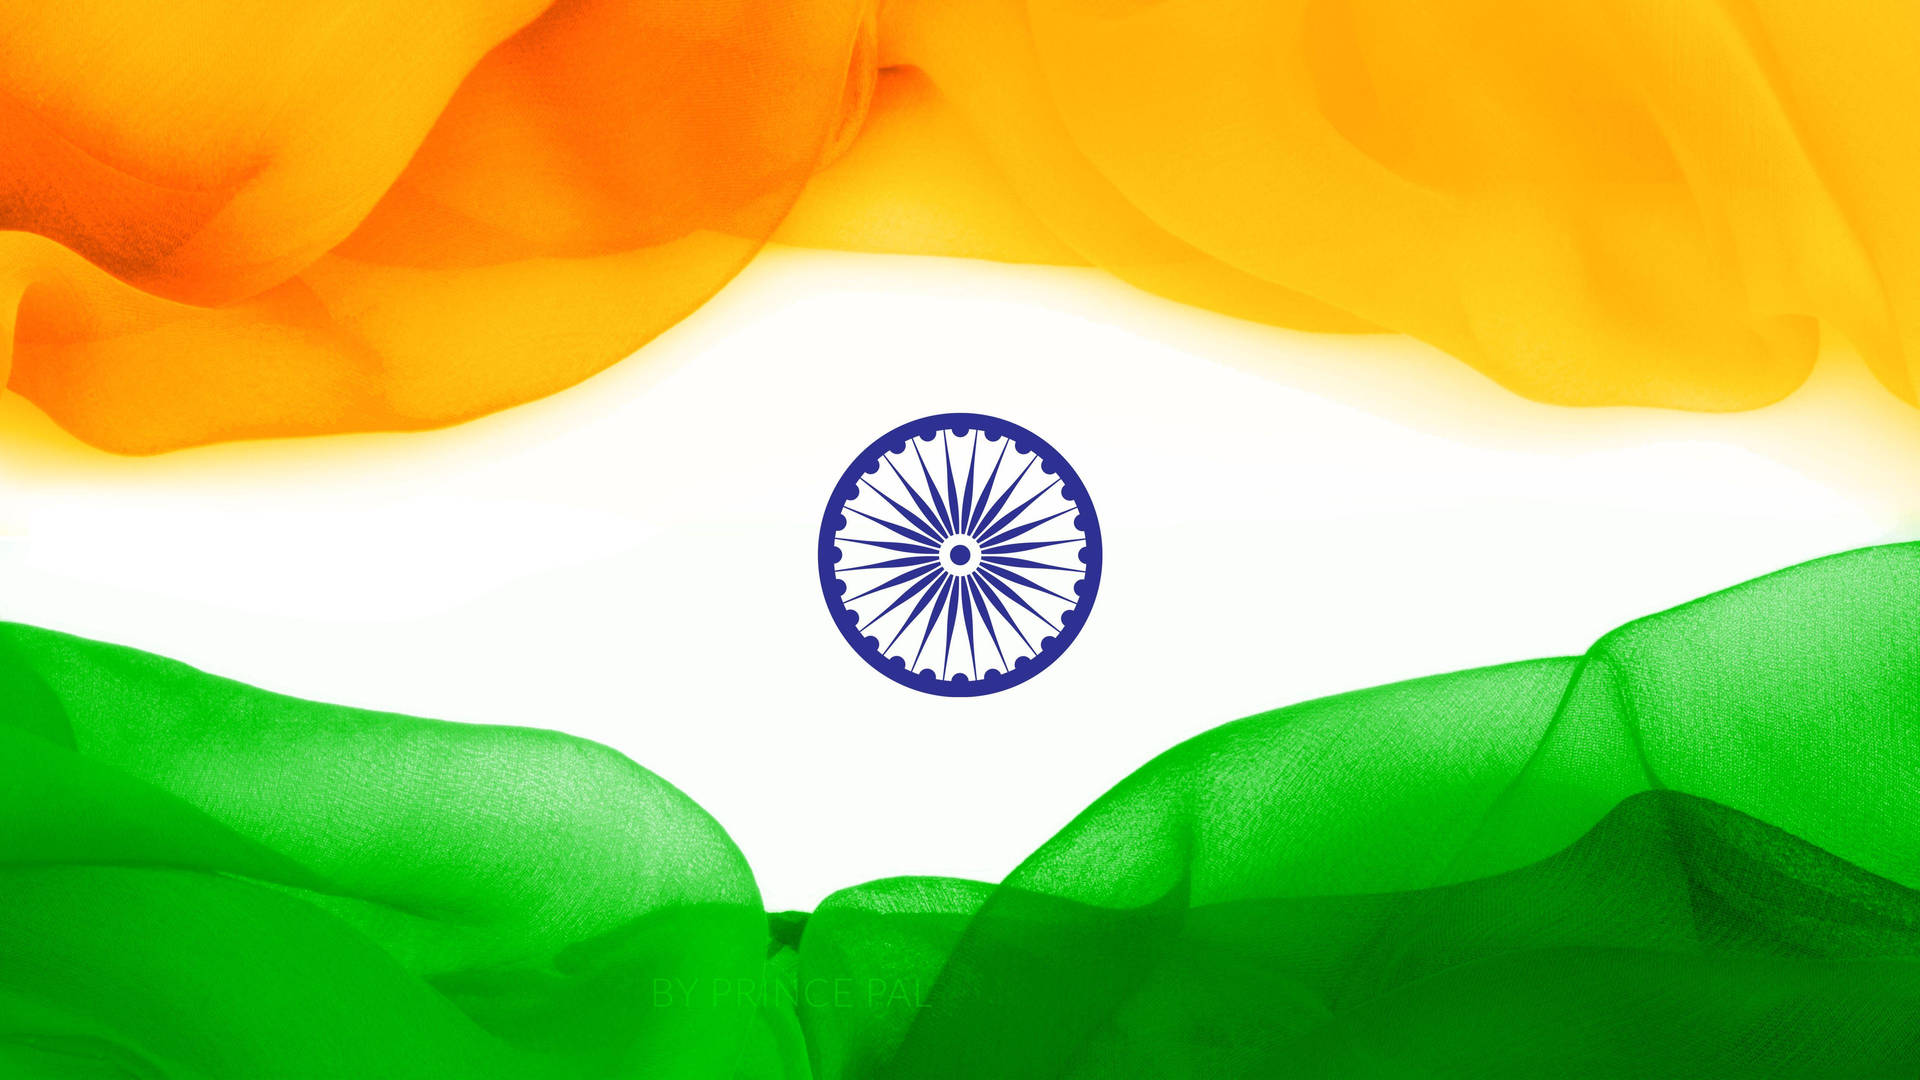 Indian Flag Hd In Flowing Abstract Background